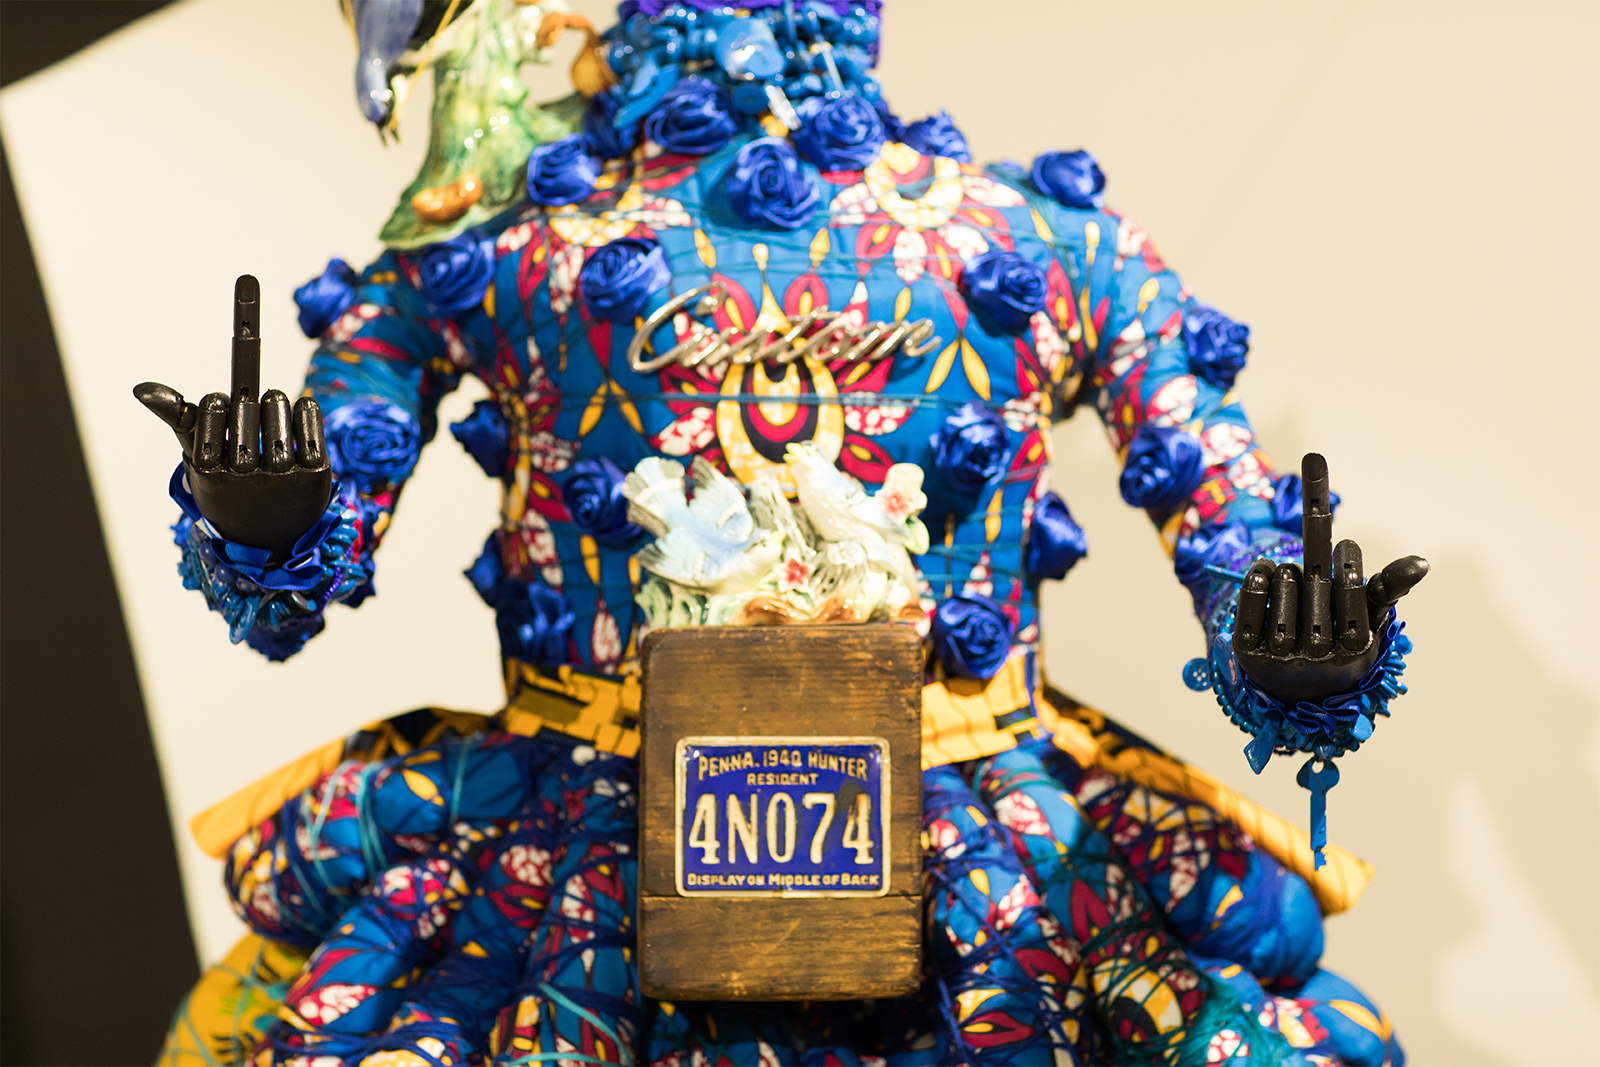 Vanessa German - Detail of figure, wearing a blue assembled dress, a license plate at the navel, and gesturing with two outstretched black hands both showing the middle finger.